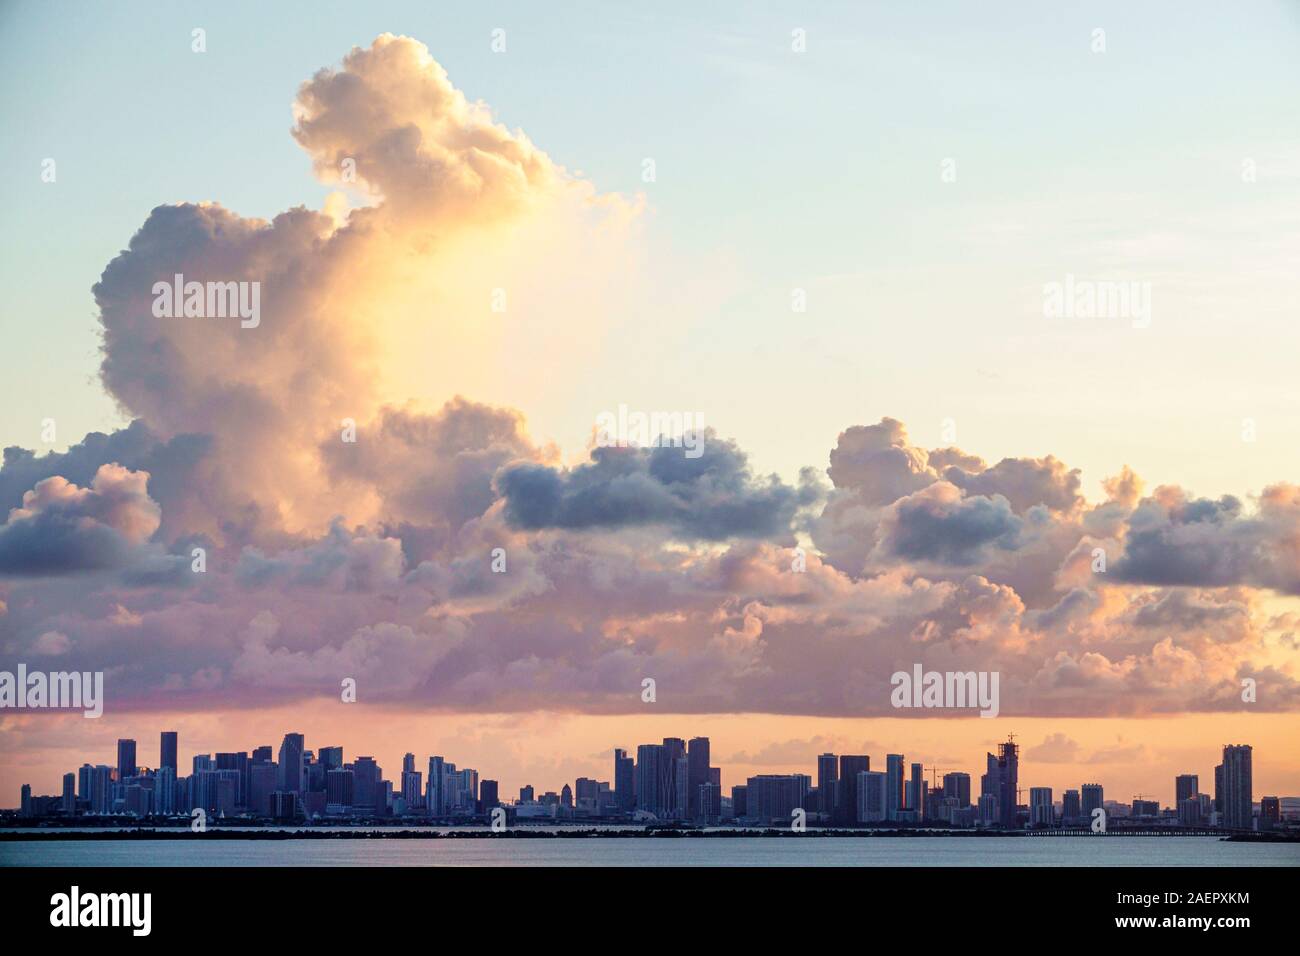 Miami Beach Florida,North Beach,Miami downtown city skyline,sunset,clouds,Biscayne Bay,aerial overhead view from above,FL191025021 Stock Photo